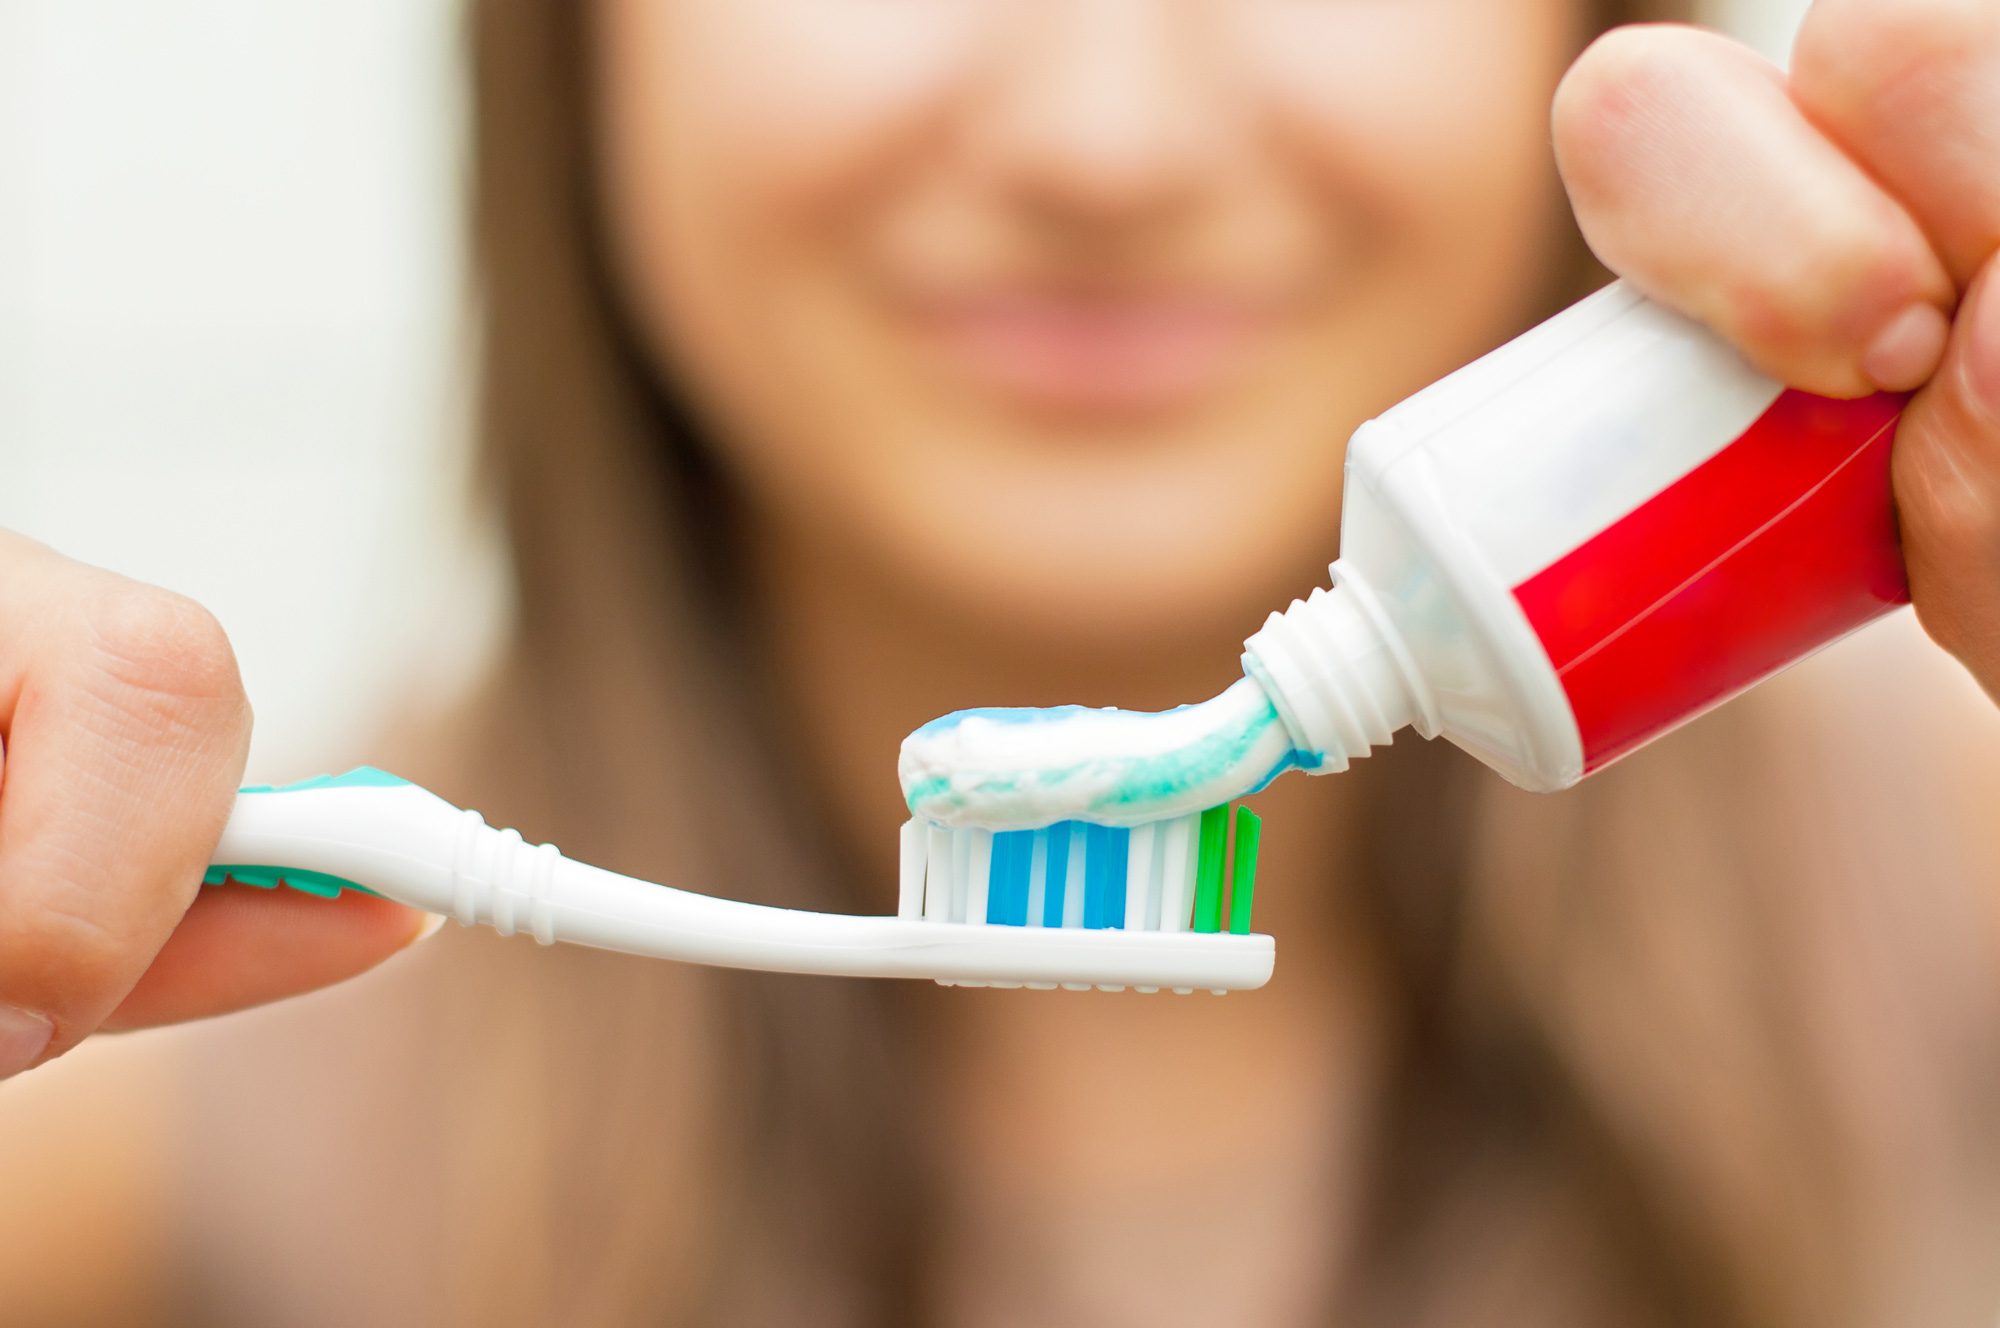 Female patient at Tri-City Dental Care puts high-fluoride toothpaste on her toothbrush.